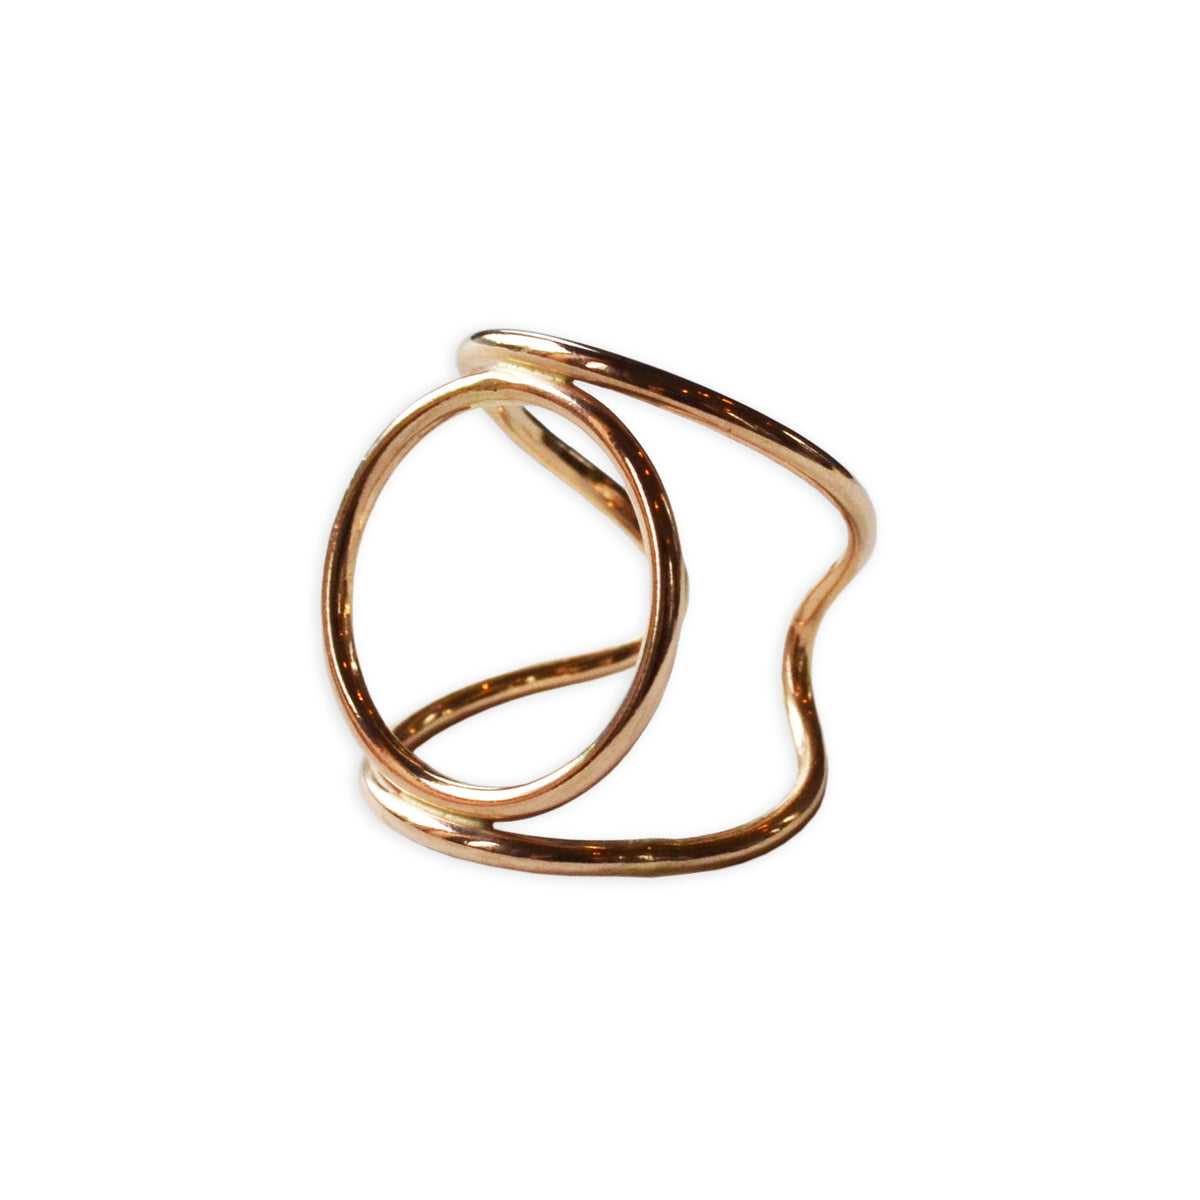 Atomic Circle Cuff Ring, Gold or Silver, Seen on Victoria Justice!